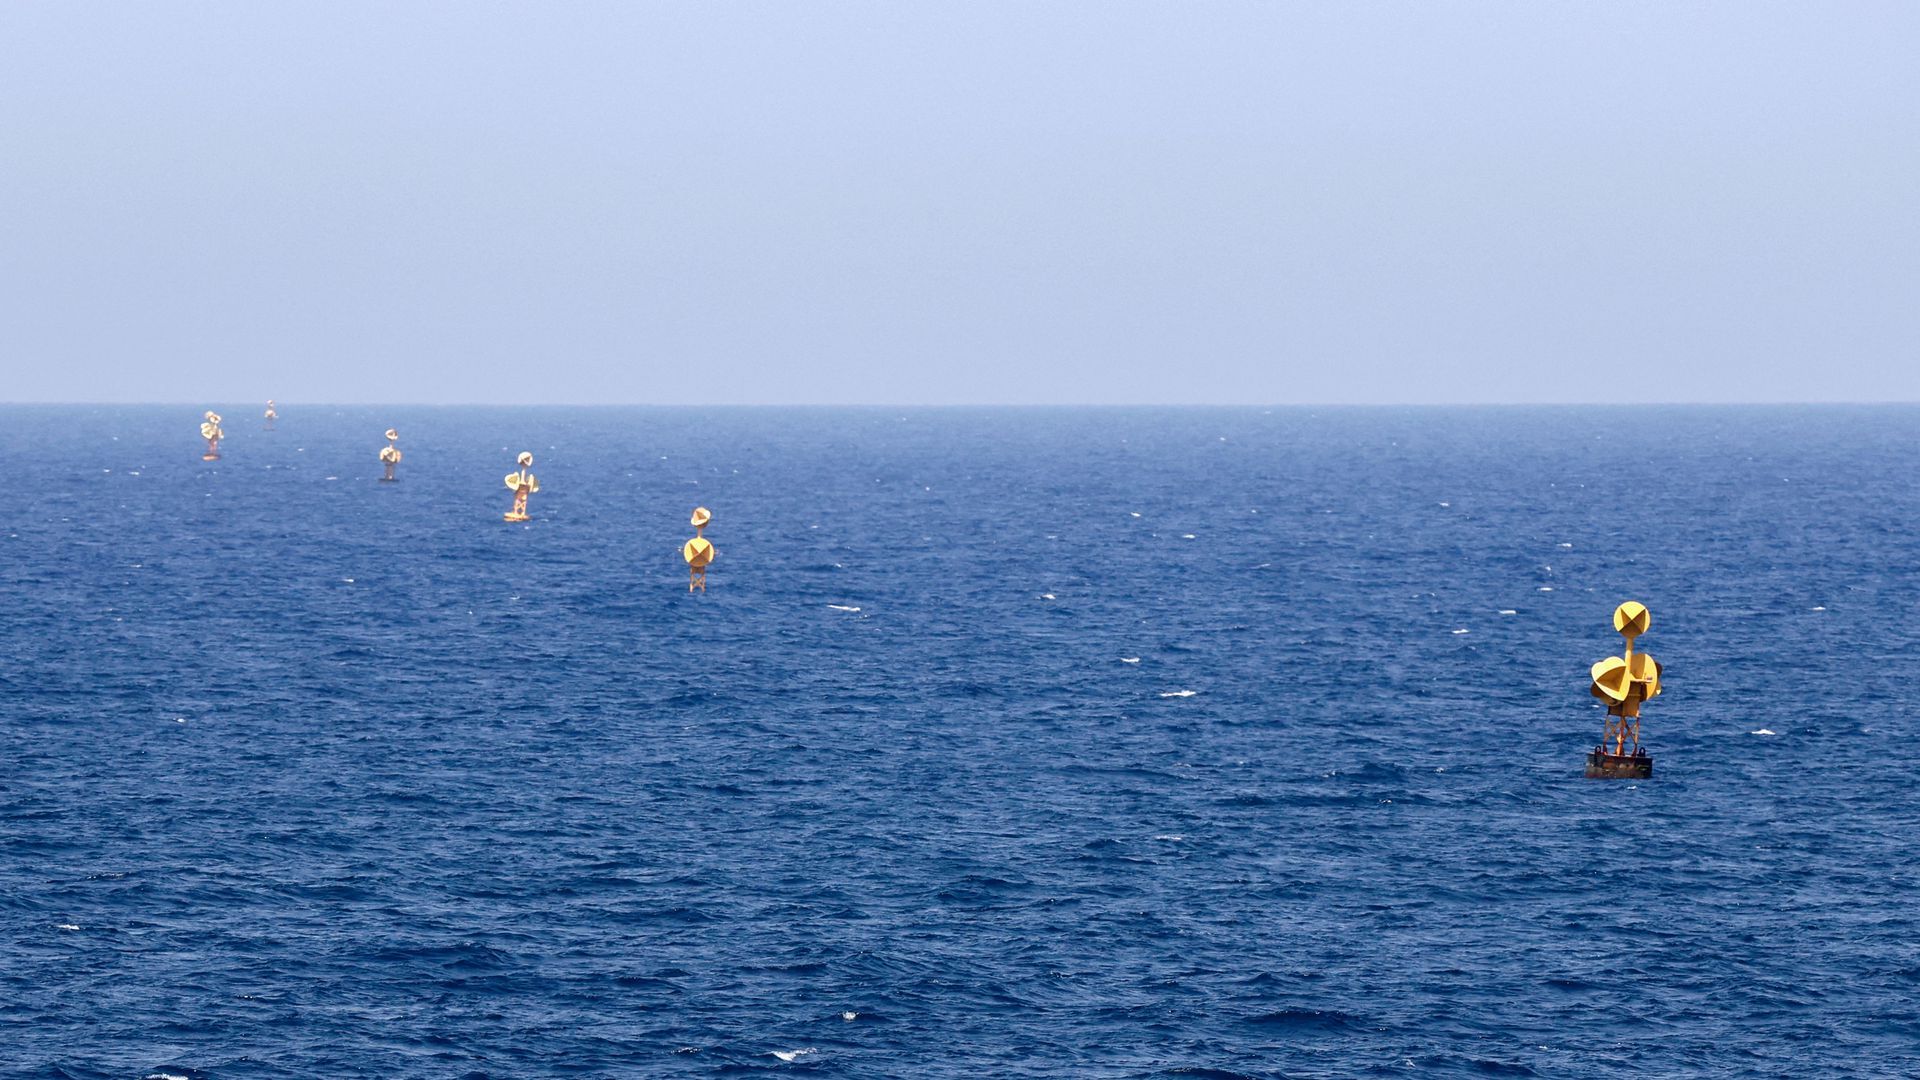 Border-marking buoys in the Mediterranean waters off the coast of Rosh Hanikra, an area between Israel and Lebanon